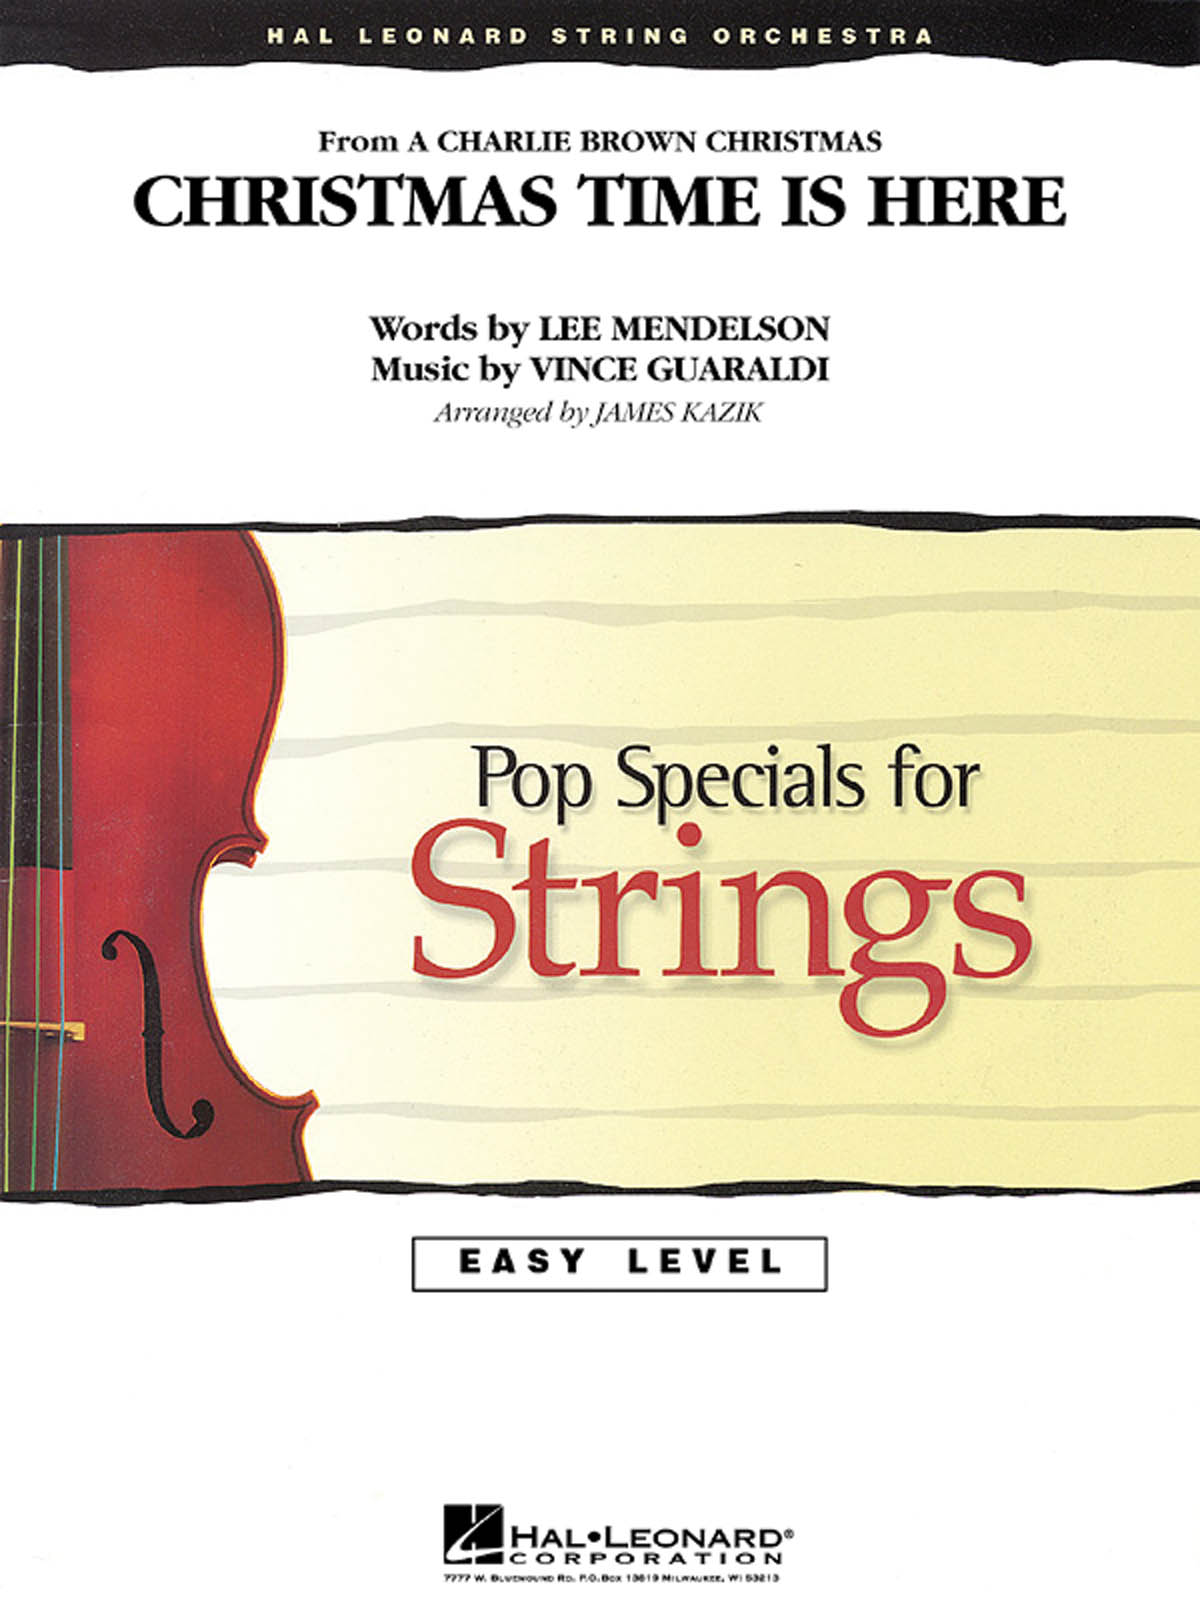 Vince Guaraldi: Christmas Time Is Here: String Orchestra: Score & Parts